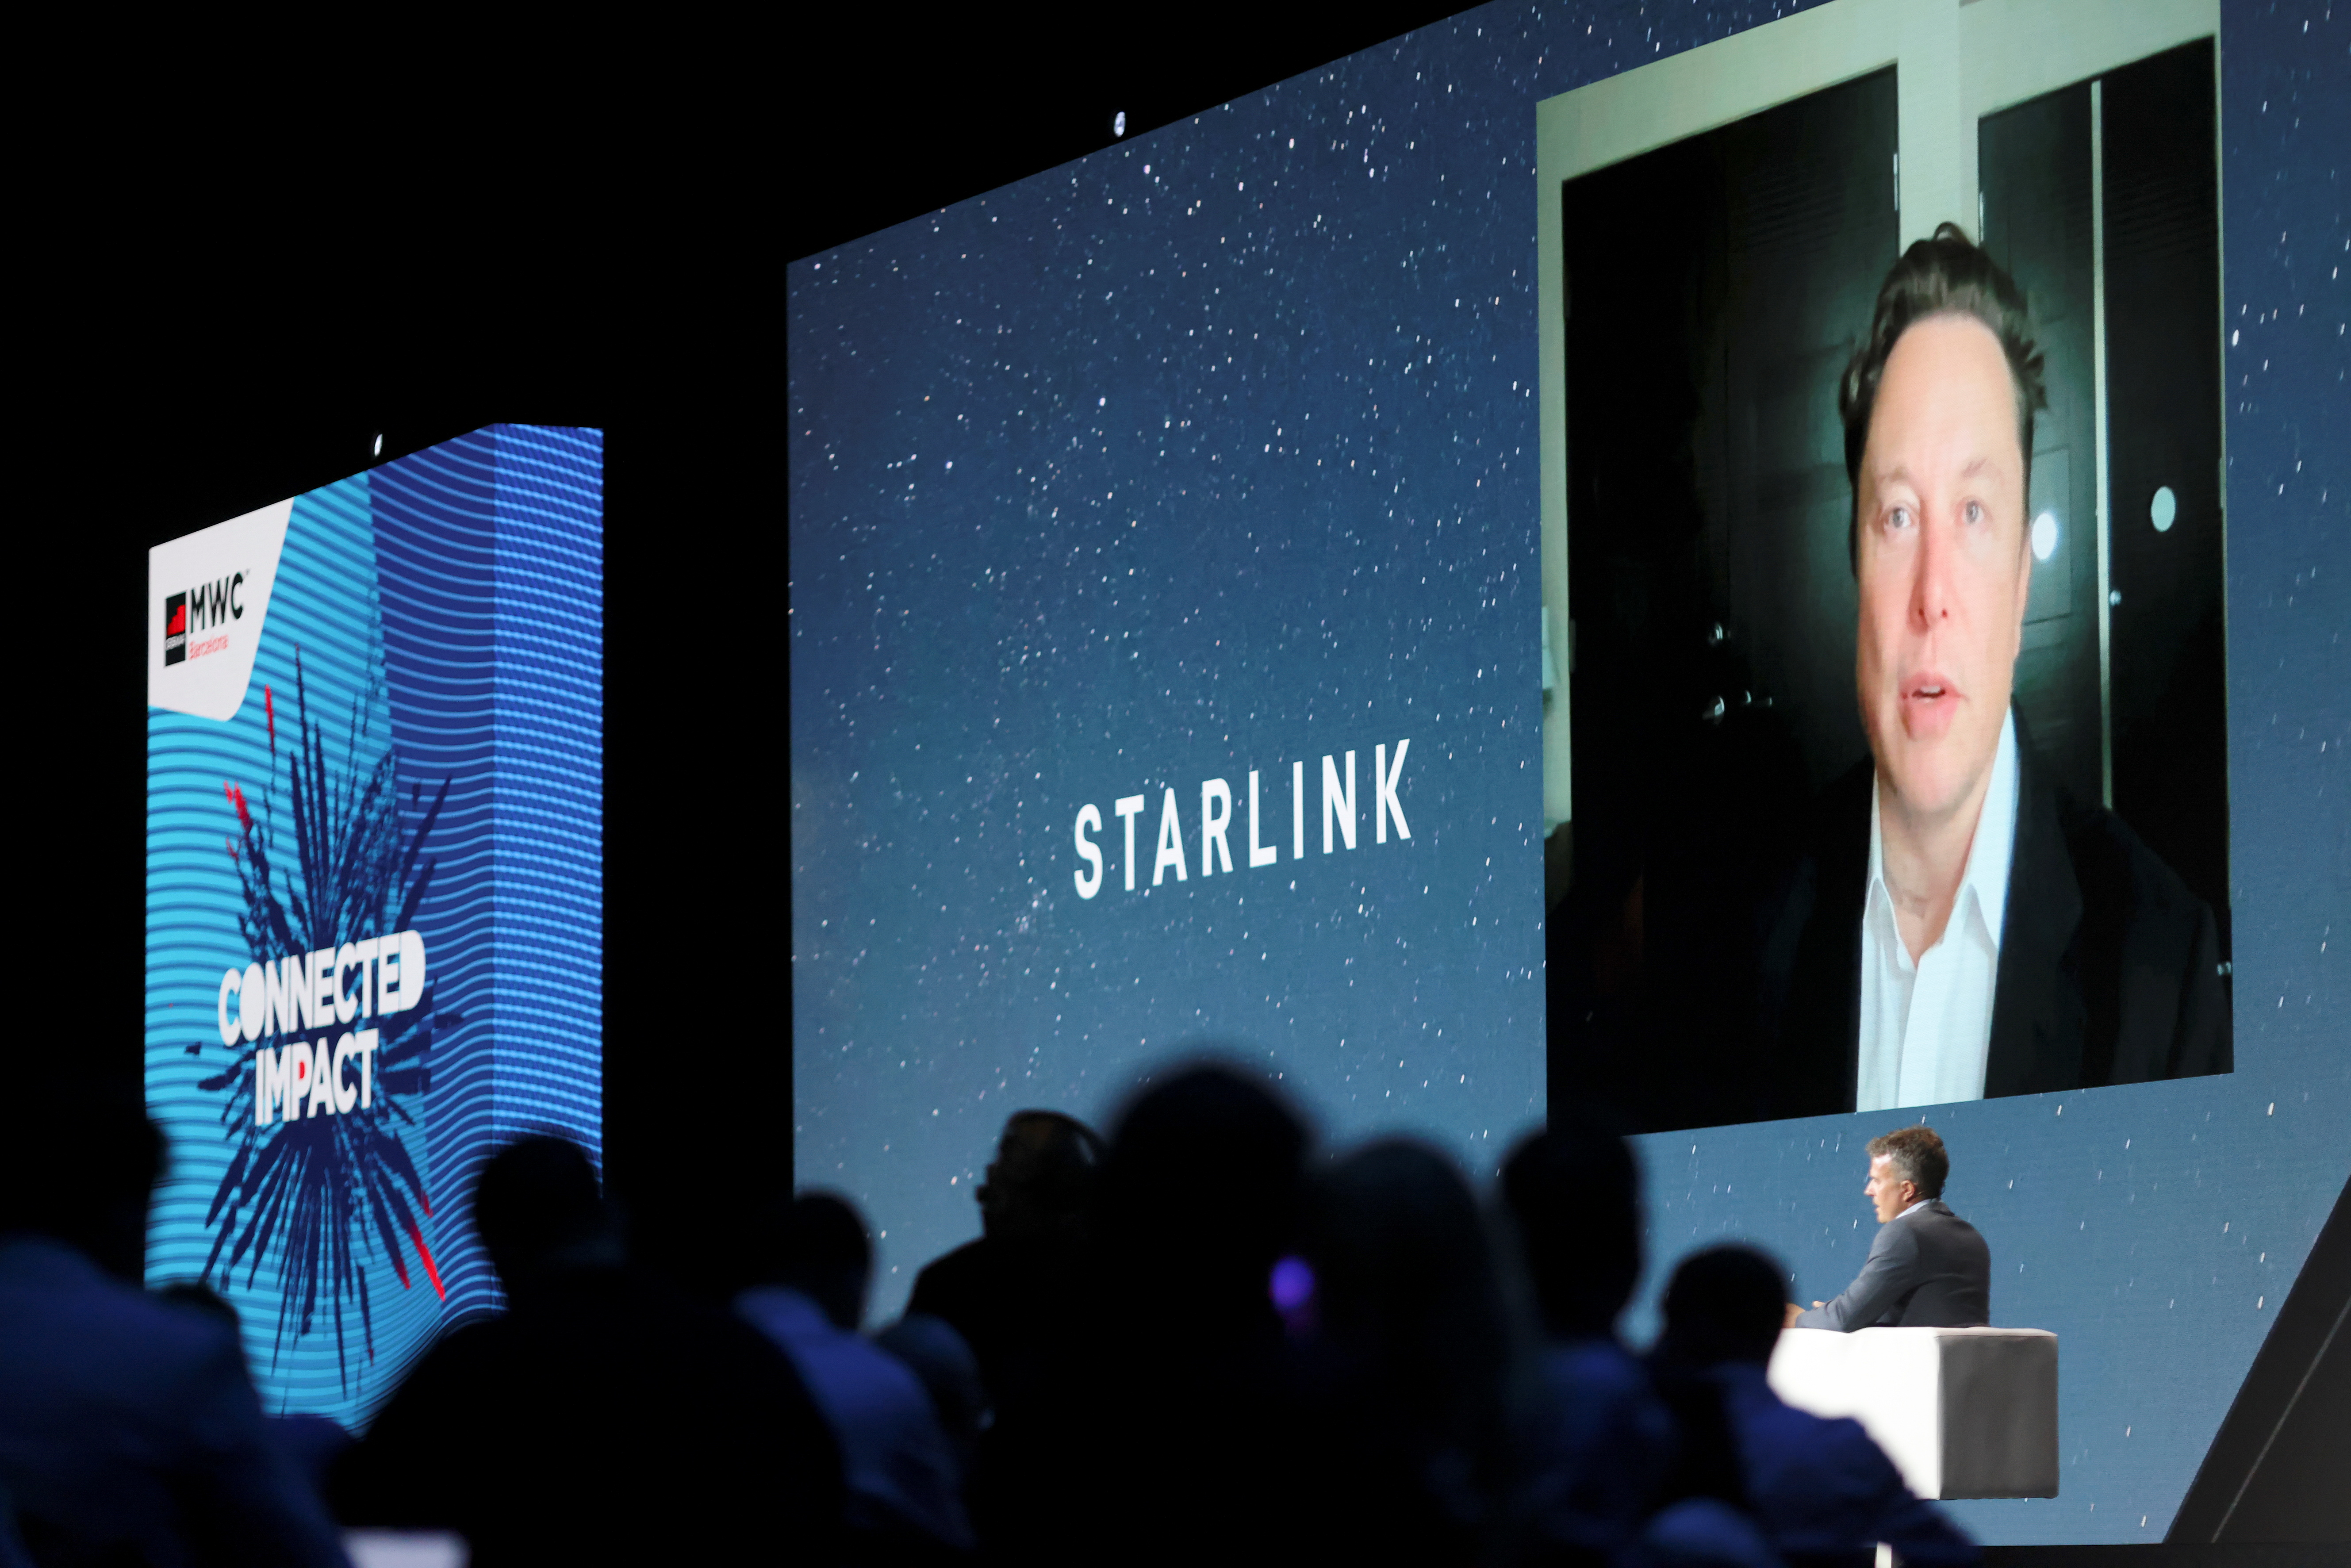 Elon Musk In An Online Conversation At The Mobile World Congress (Mwc) In Barcelona Last June 